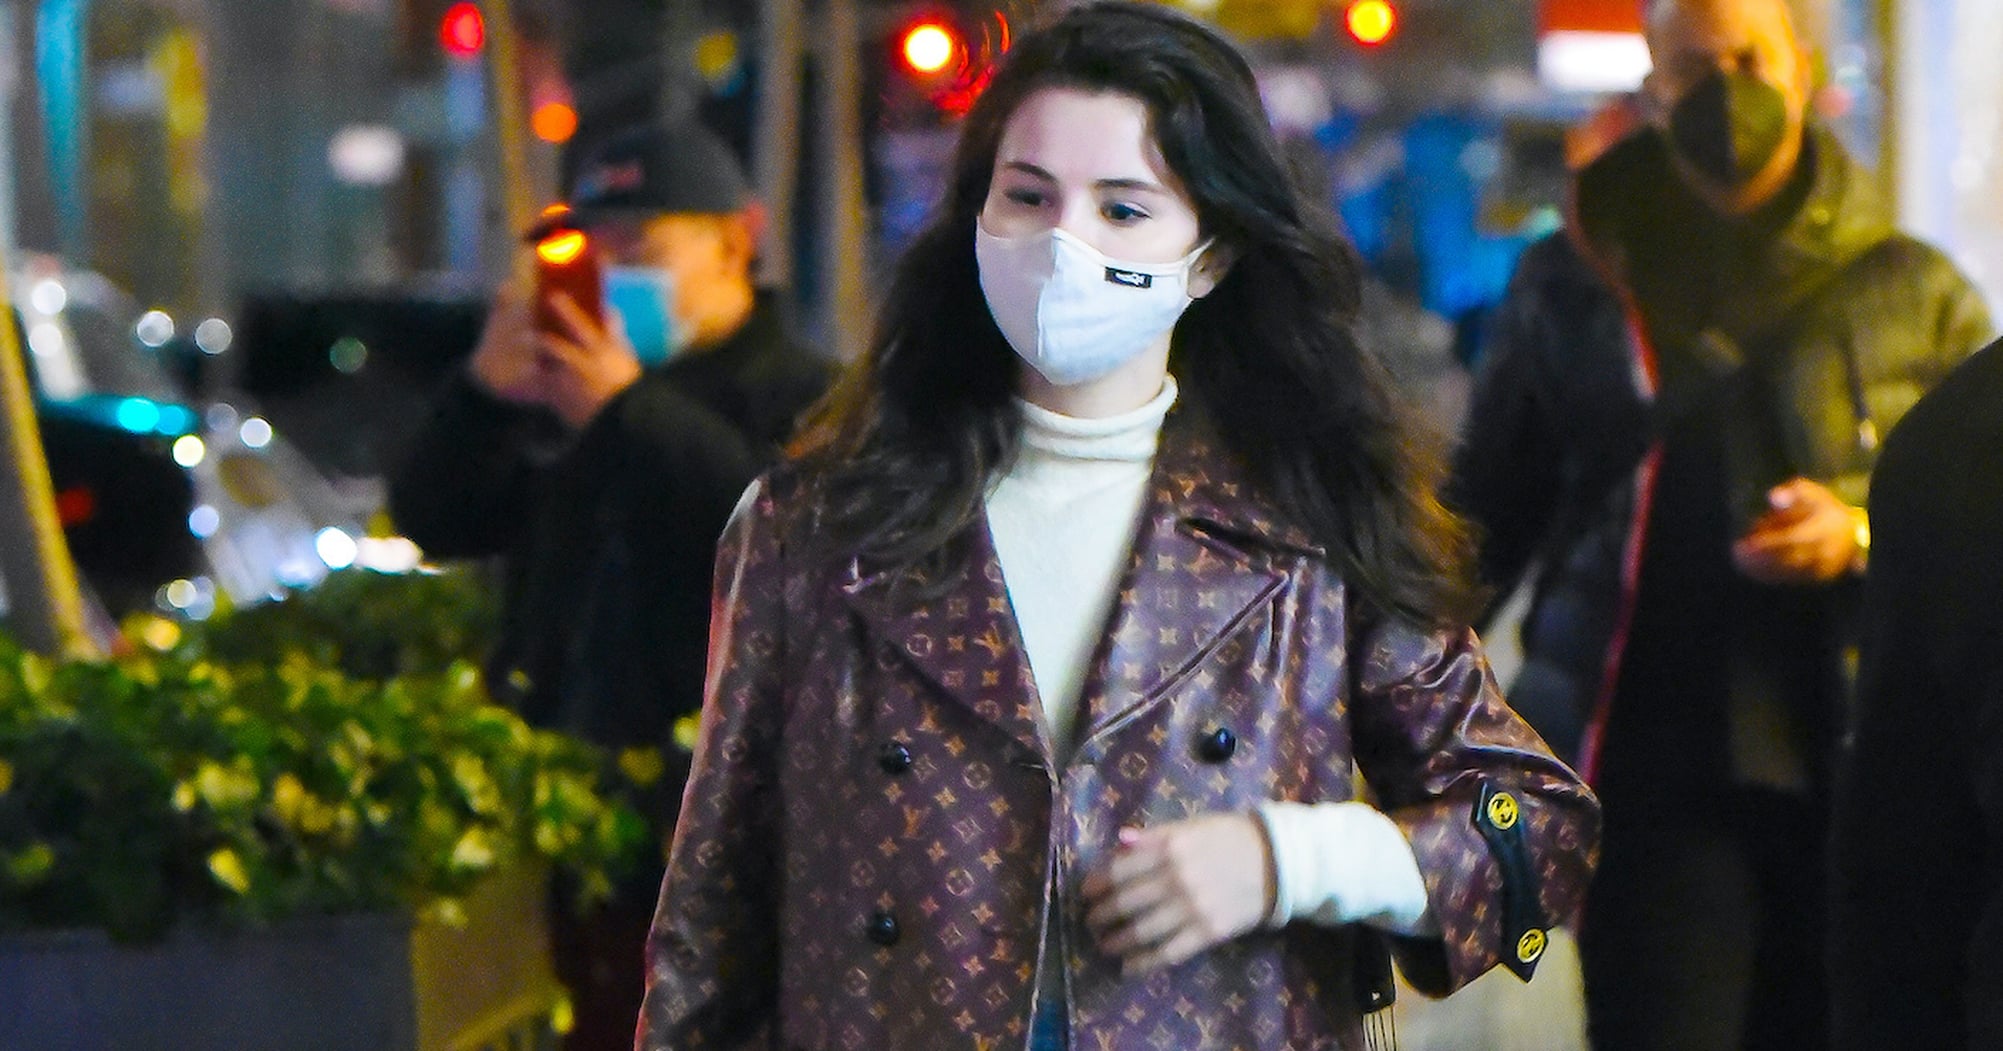 Selena Gomez Wearing Logo-Covered Louis Vuitton Coat in NYC